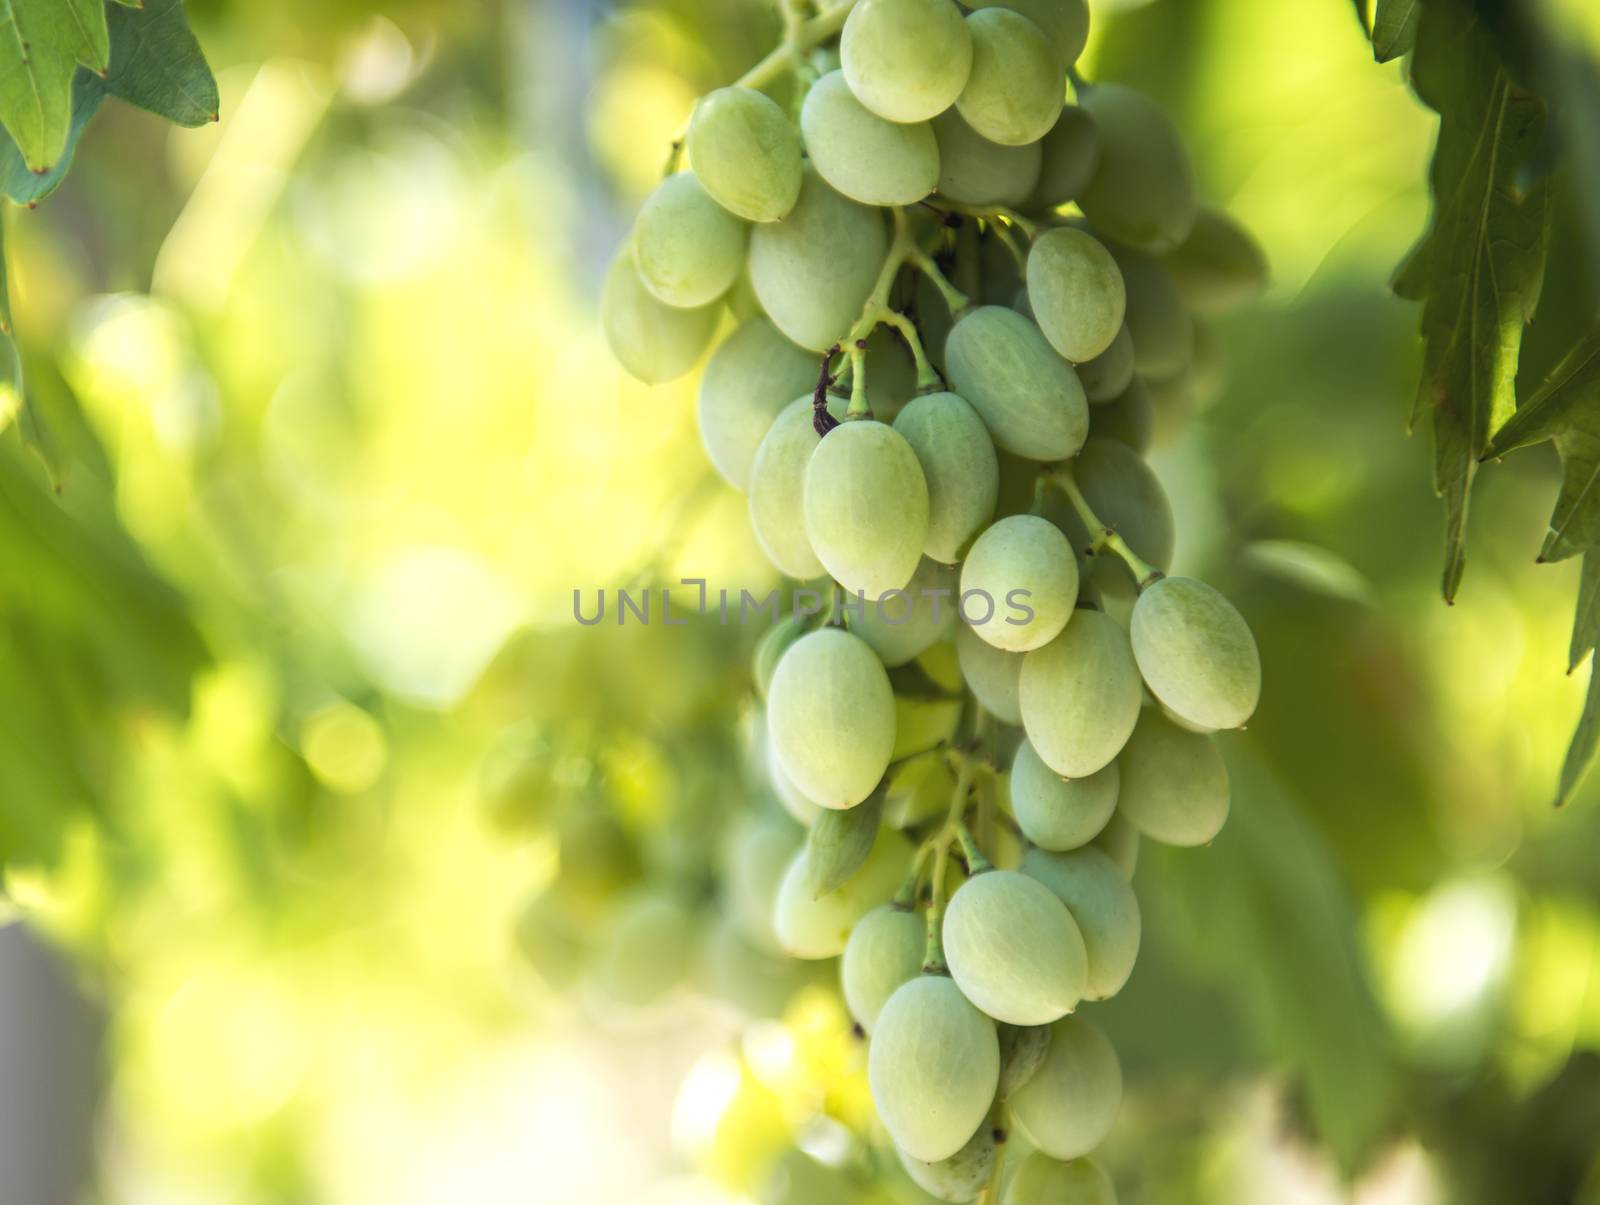 Bunch of Grapes by thisboy